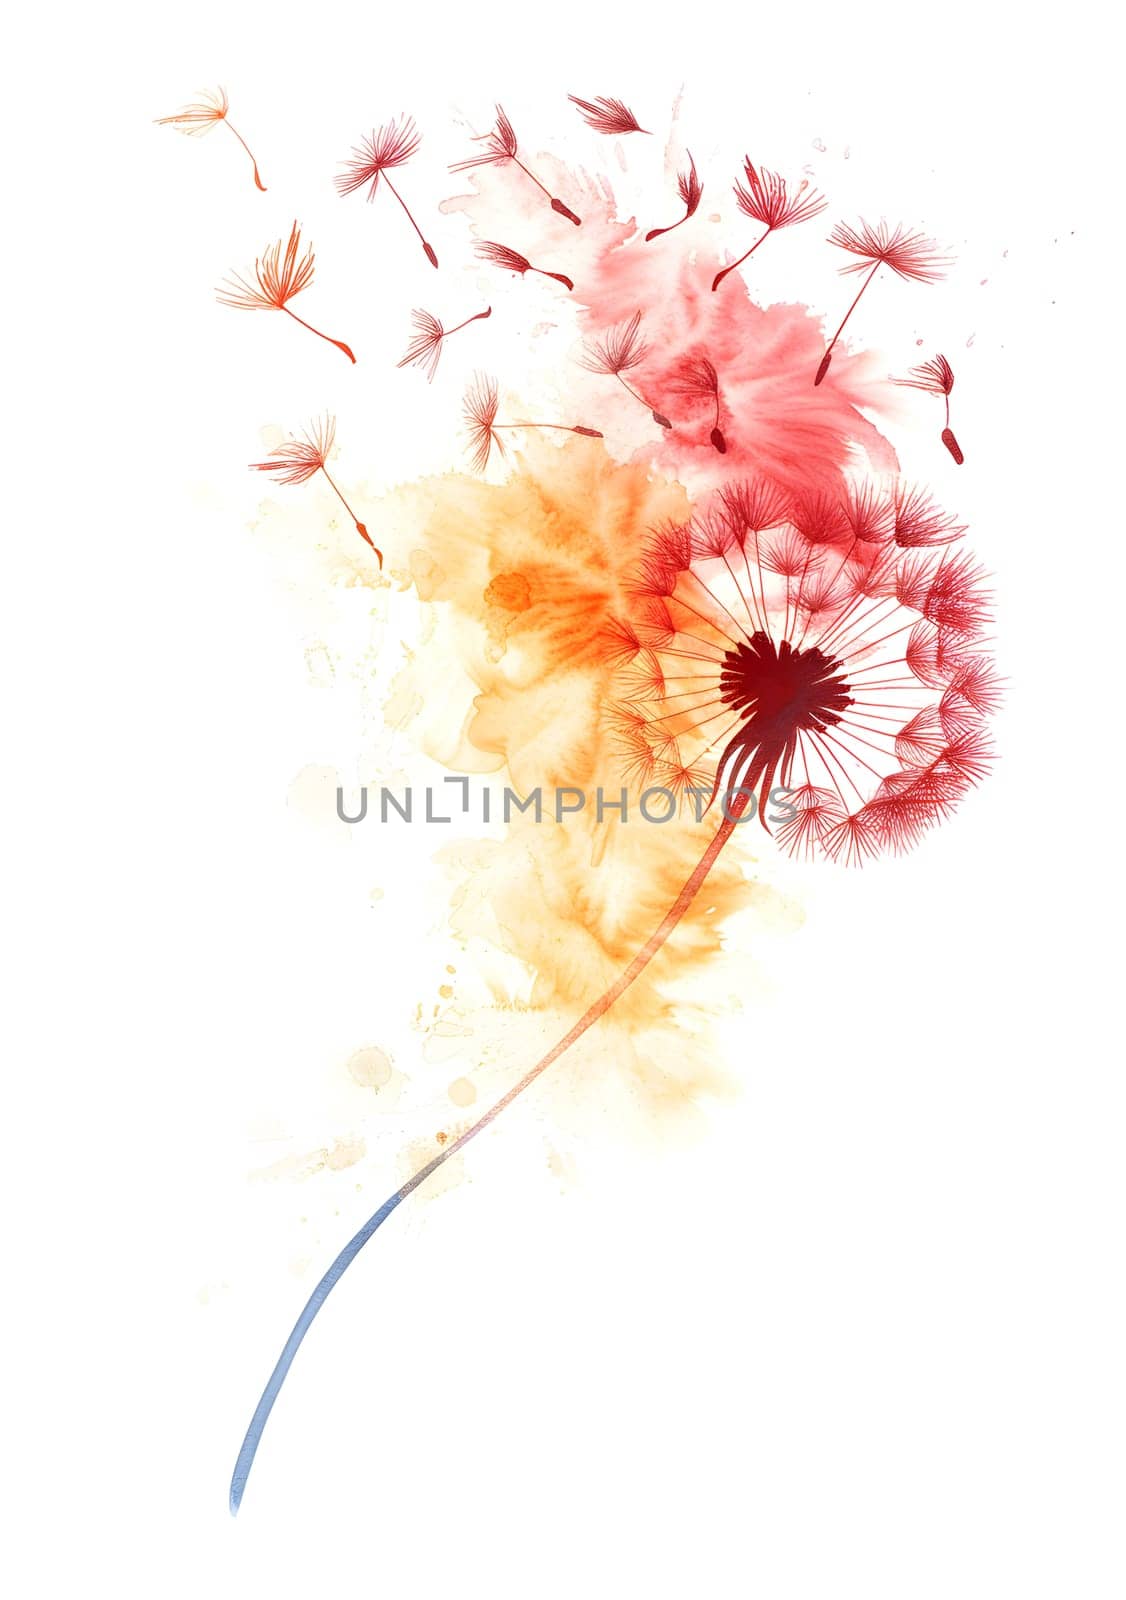 A beautiful watercolor painting capturing a dandelion flower with seeds floating in the wind, showcasing the delicate petals and twigs of the plant